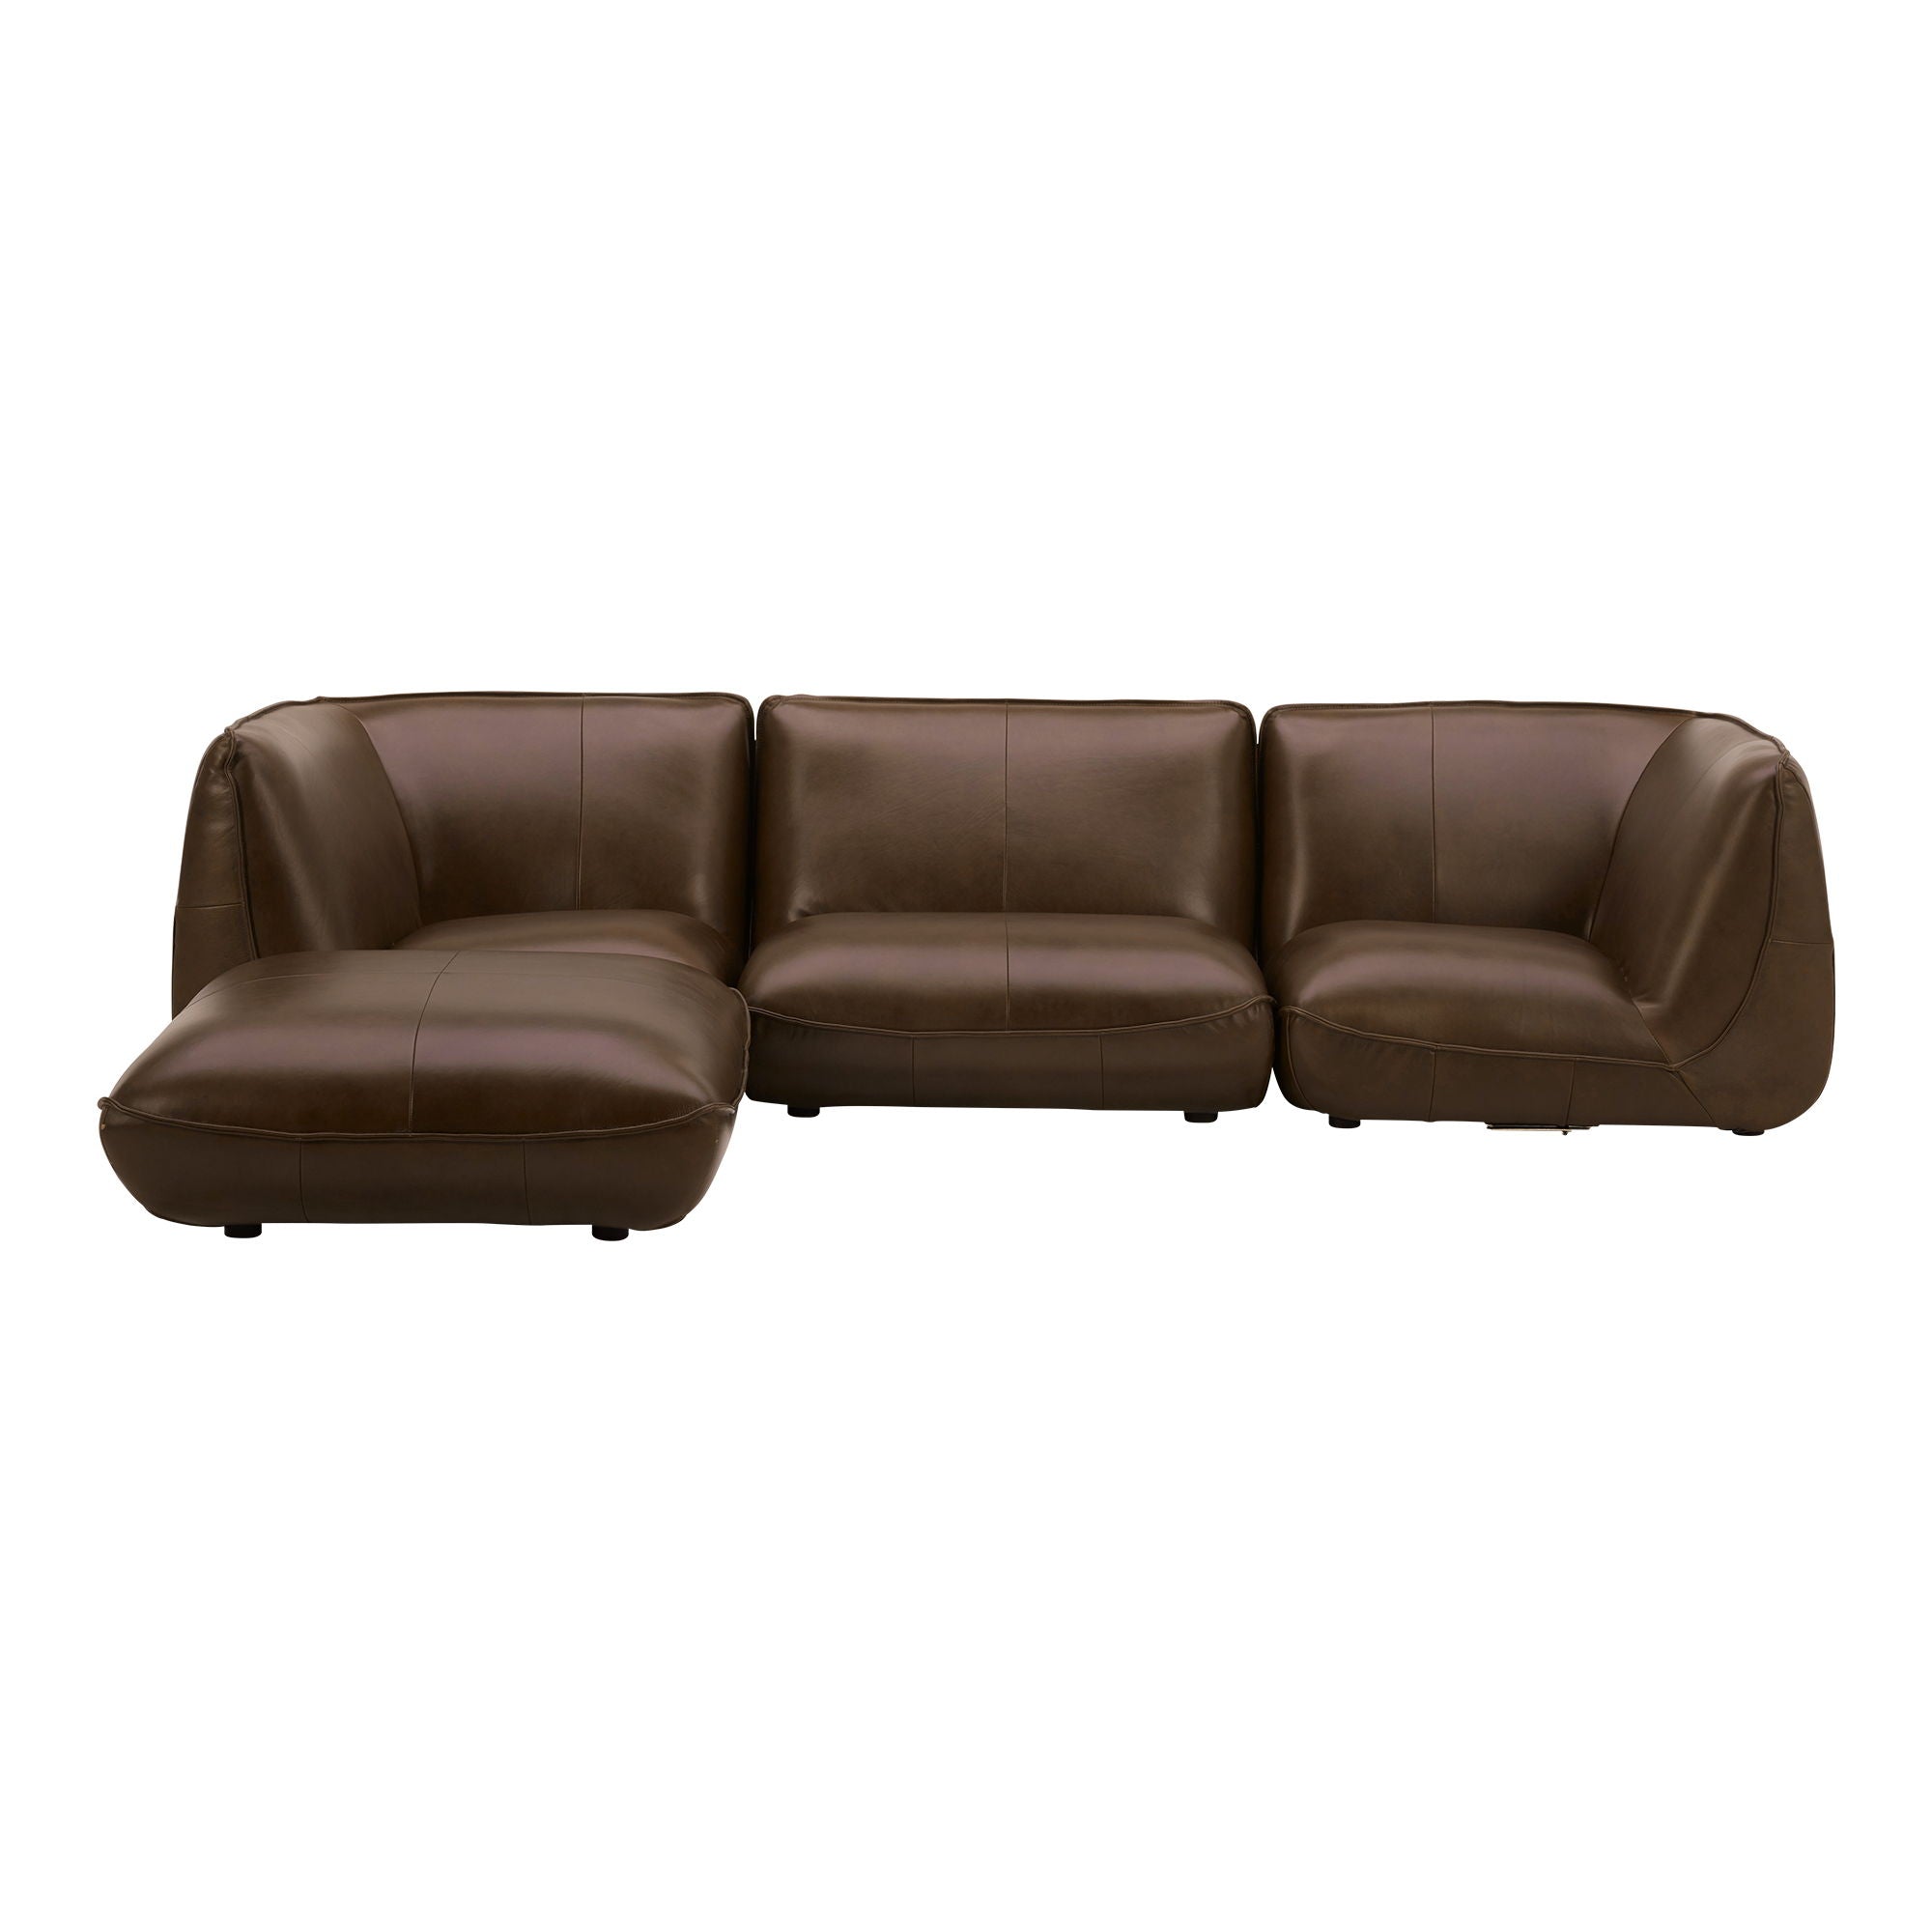 Brown Leather Sectional - Modular, Zeppelin Lounge